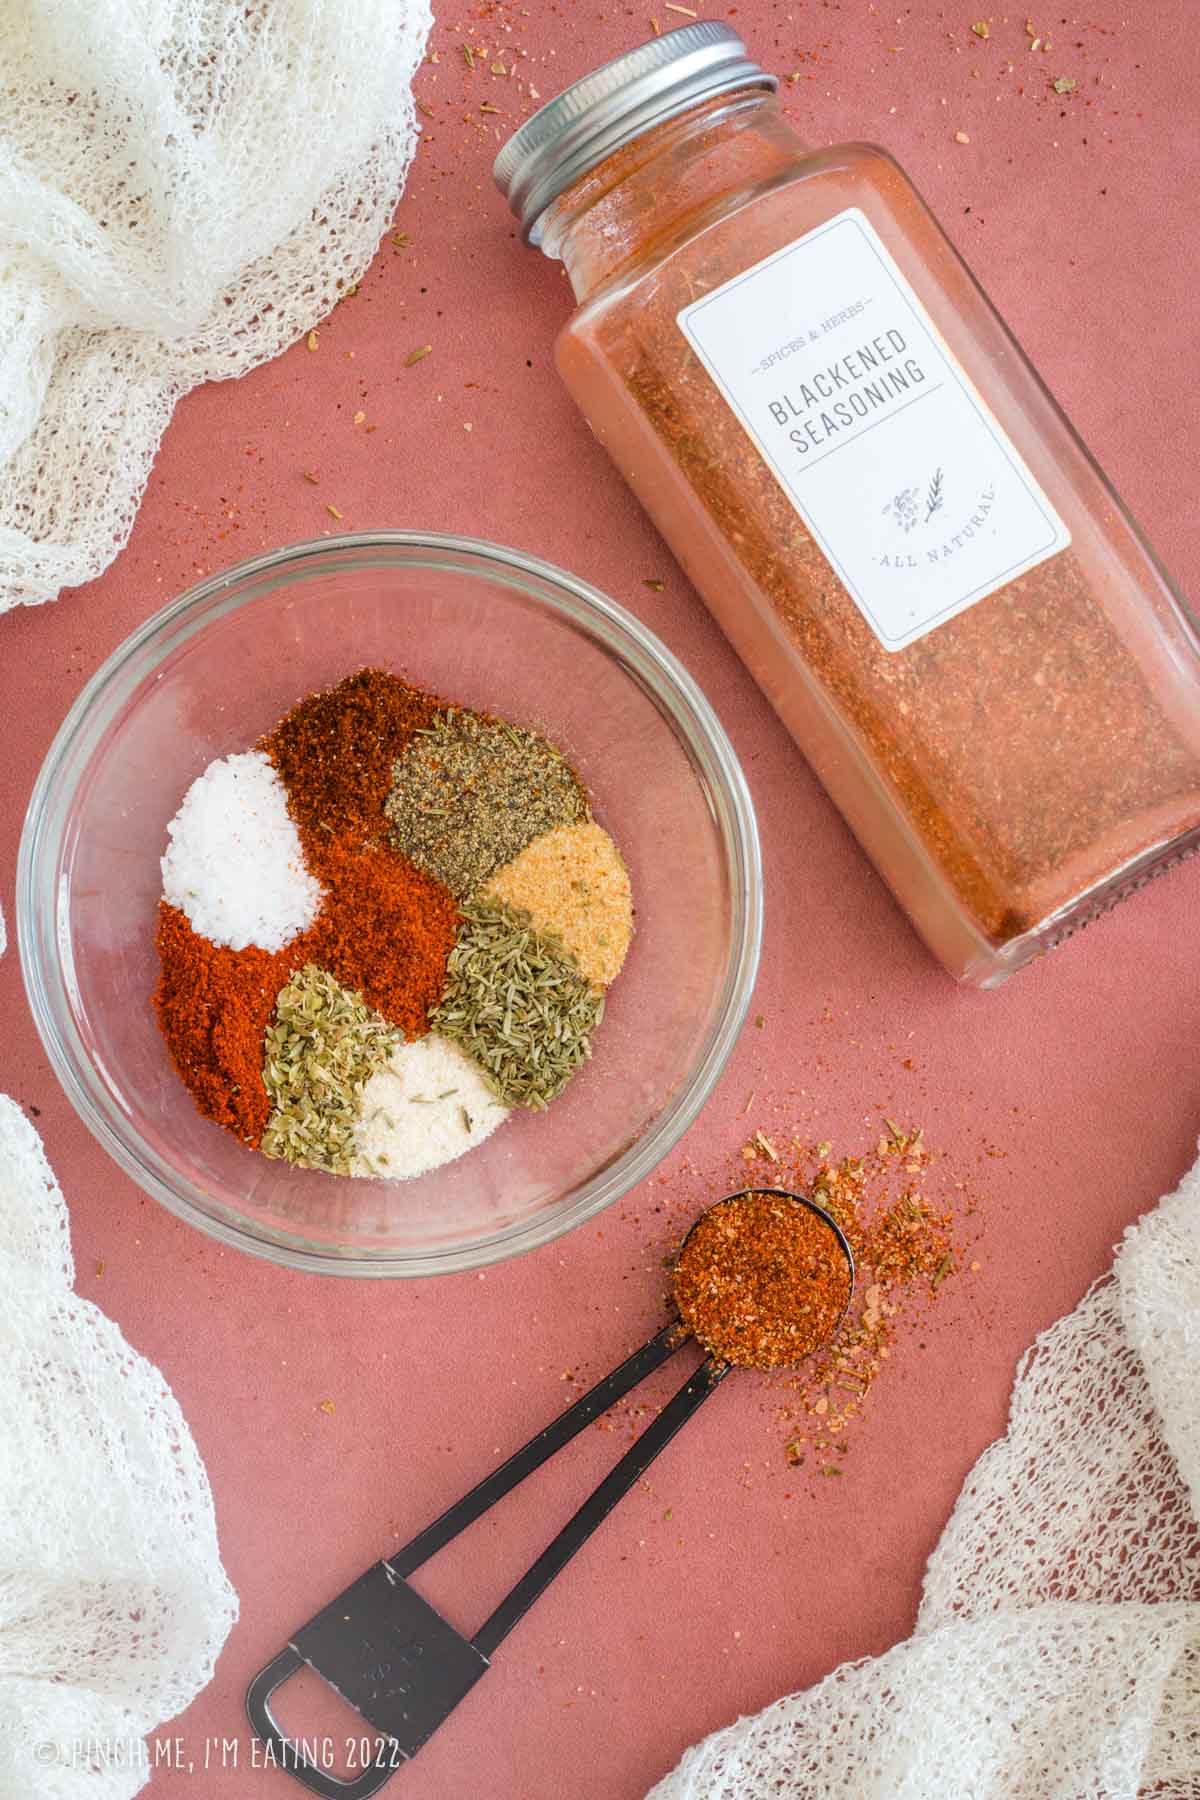 Homemade blackened seasoning ingredients in a bowl and a labeled spice bottle.